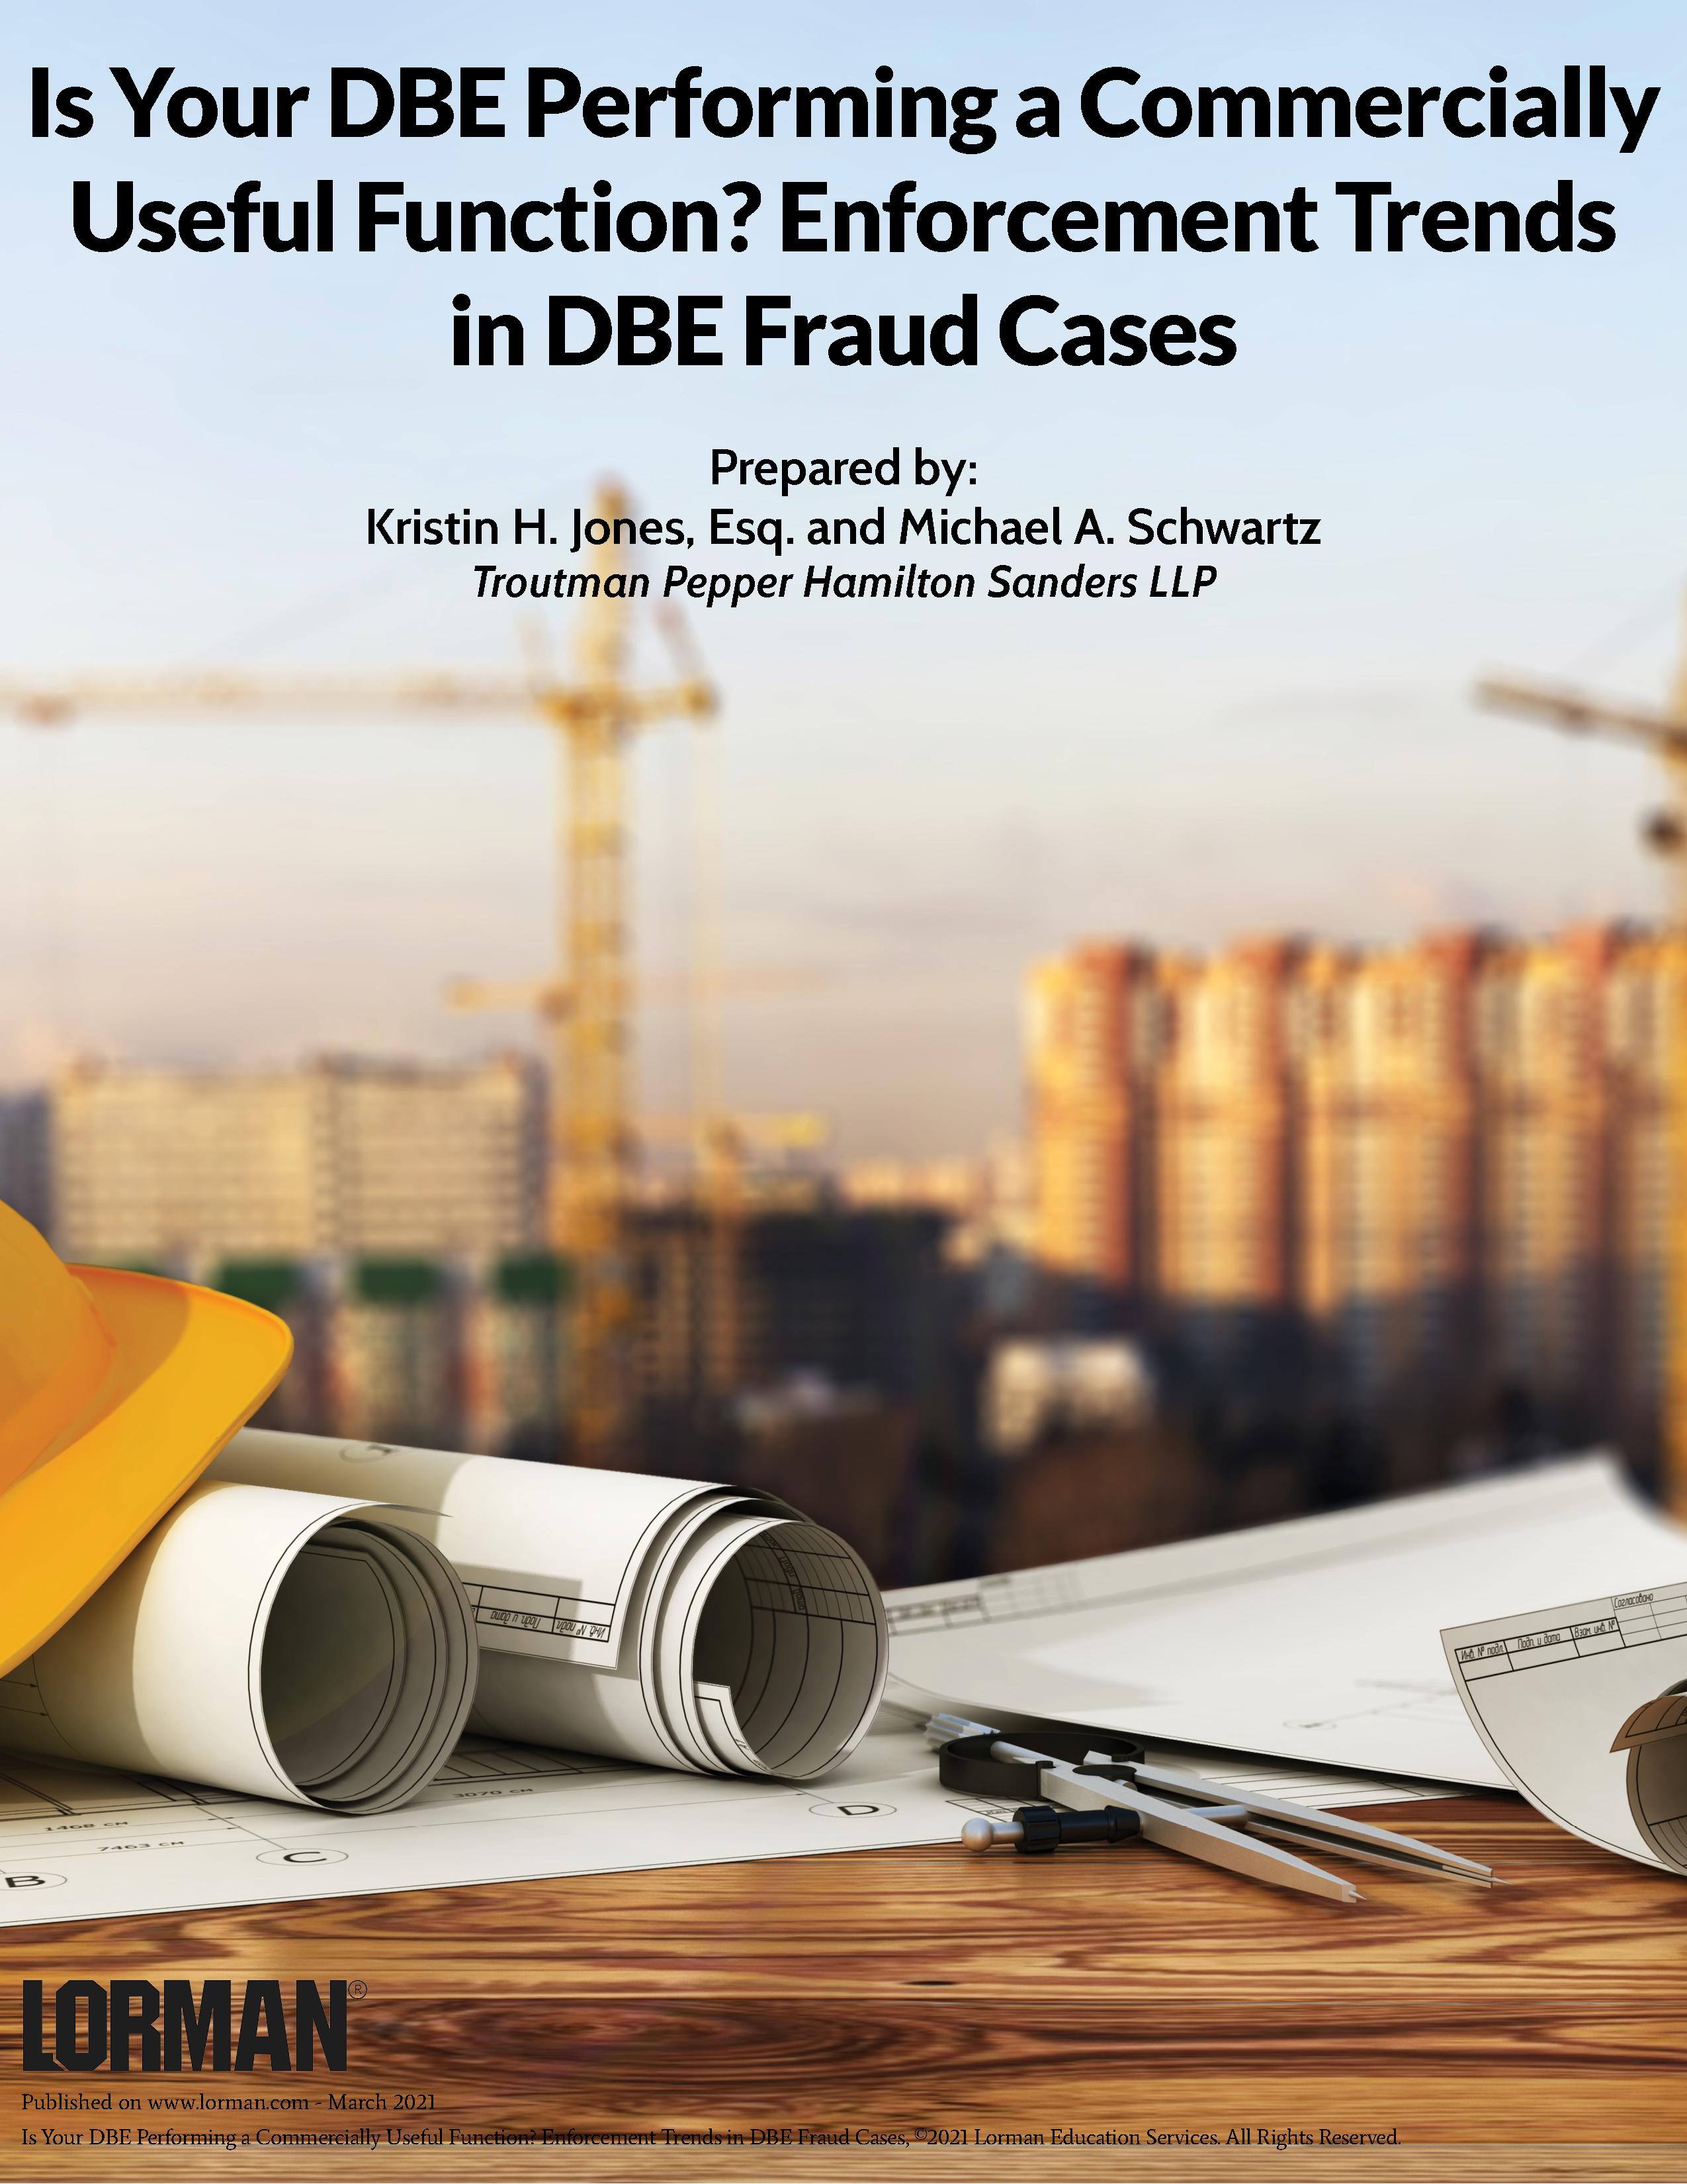 Is Your DBE Performing a Commercially Useful Function? Enforcement Trends in DBE Fraud Cases